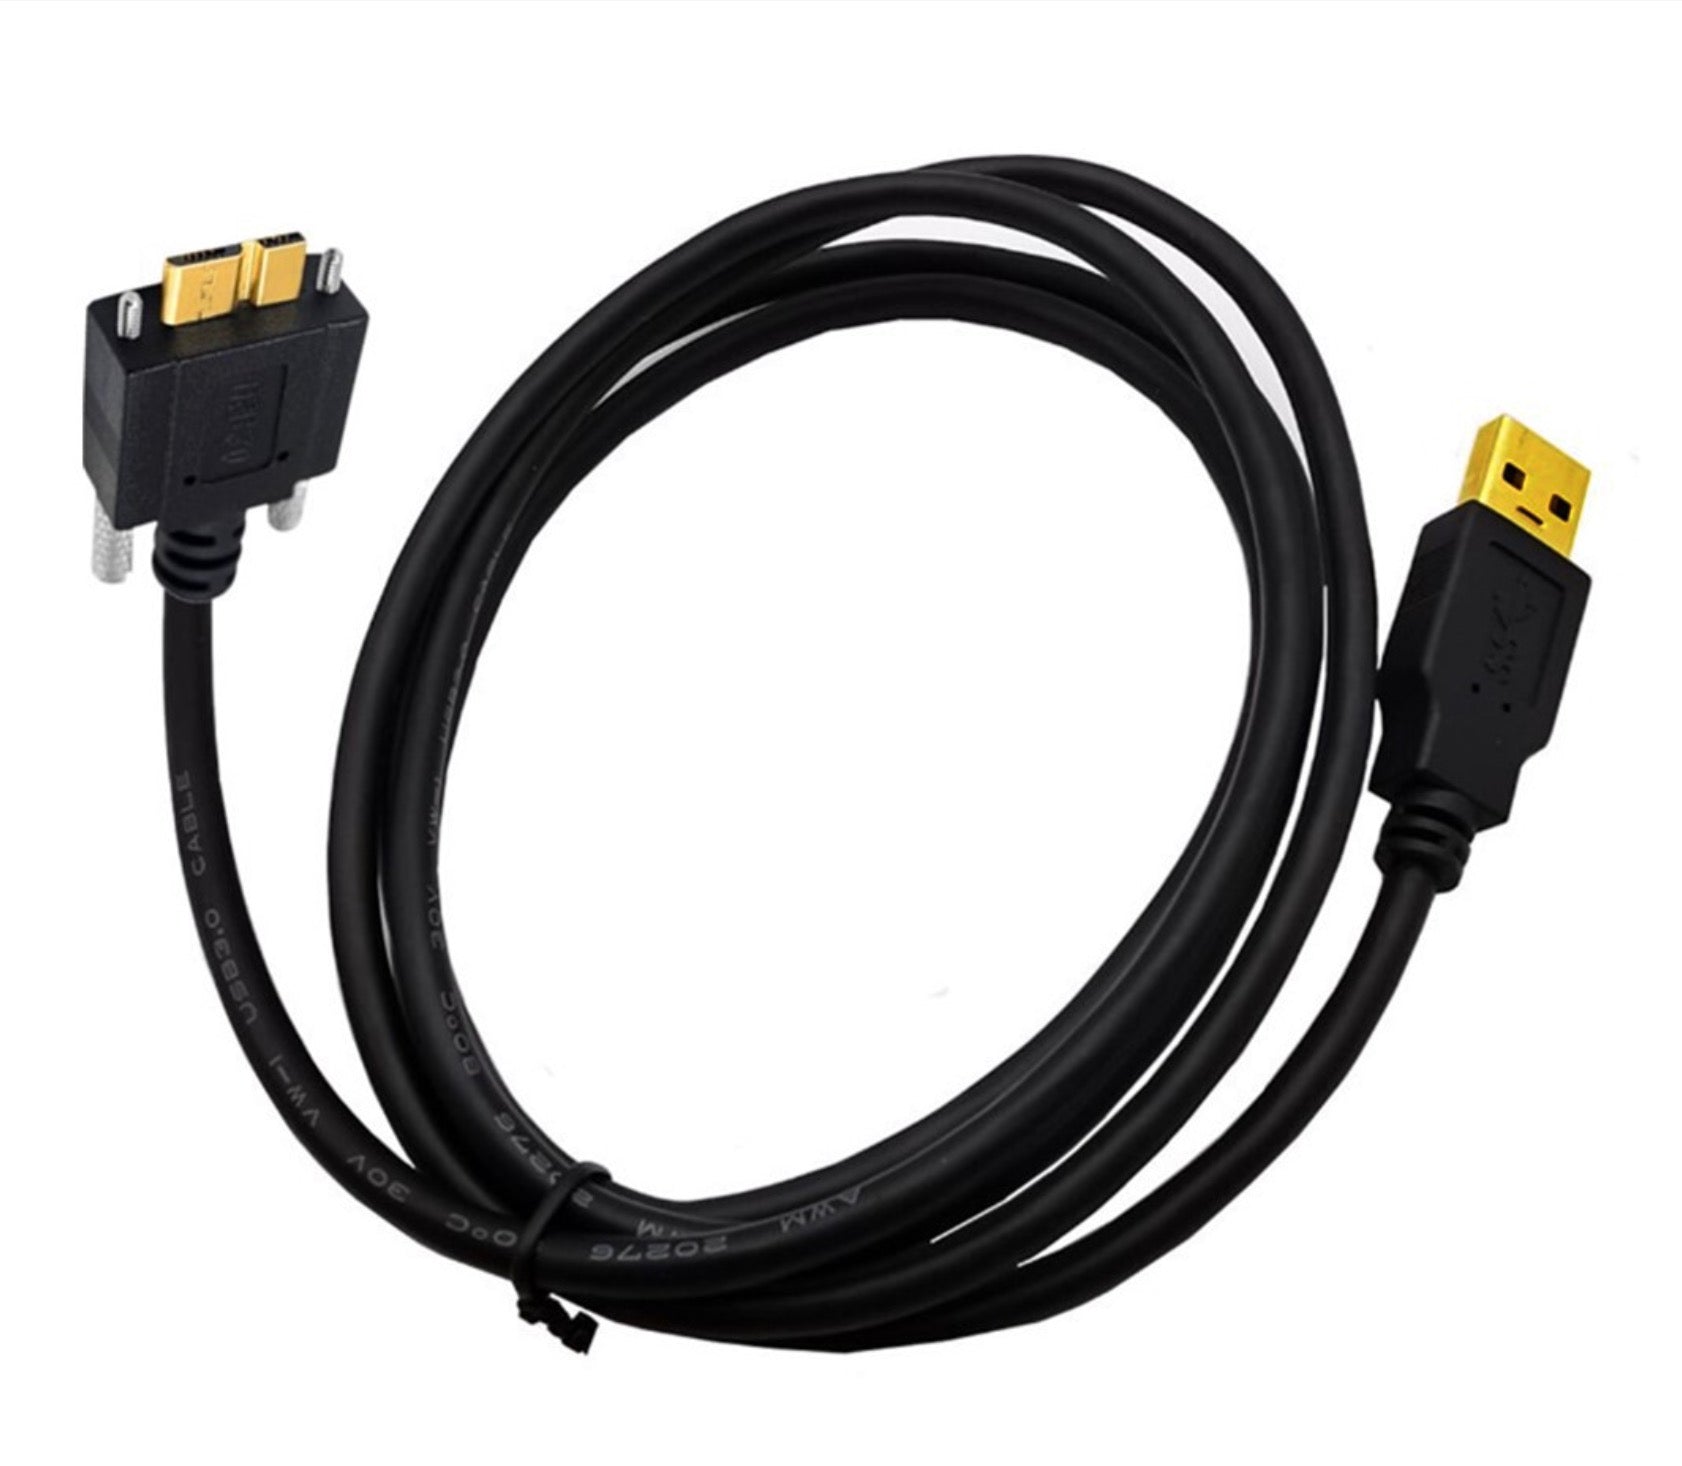 USB-A 3.0 Male to Micro-B Charge & Sync Cable with Locking Screws